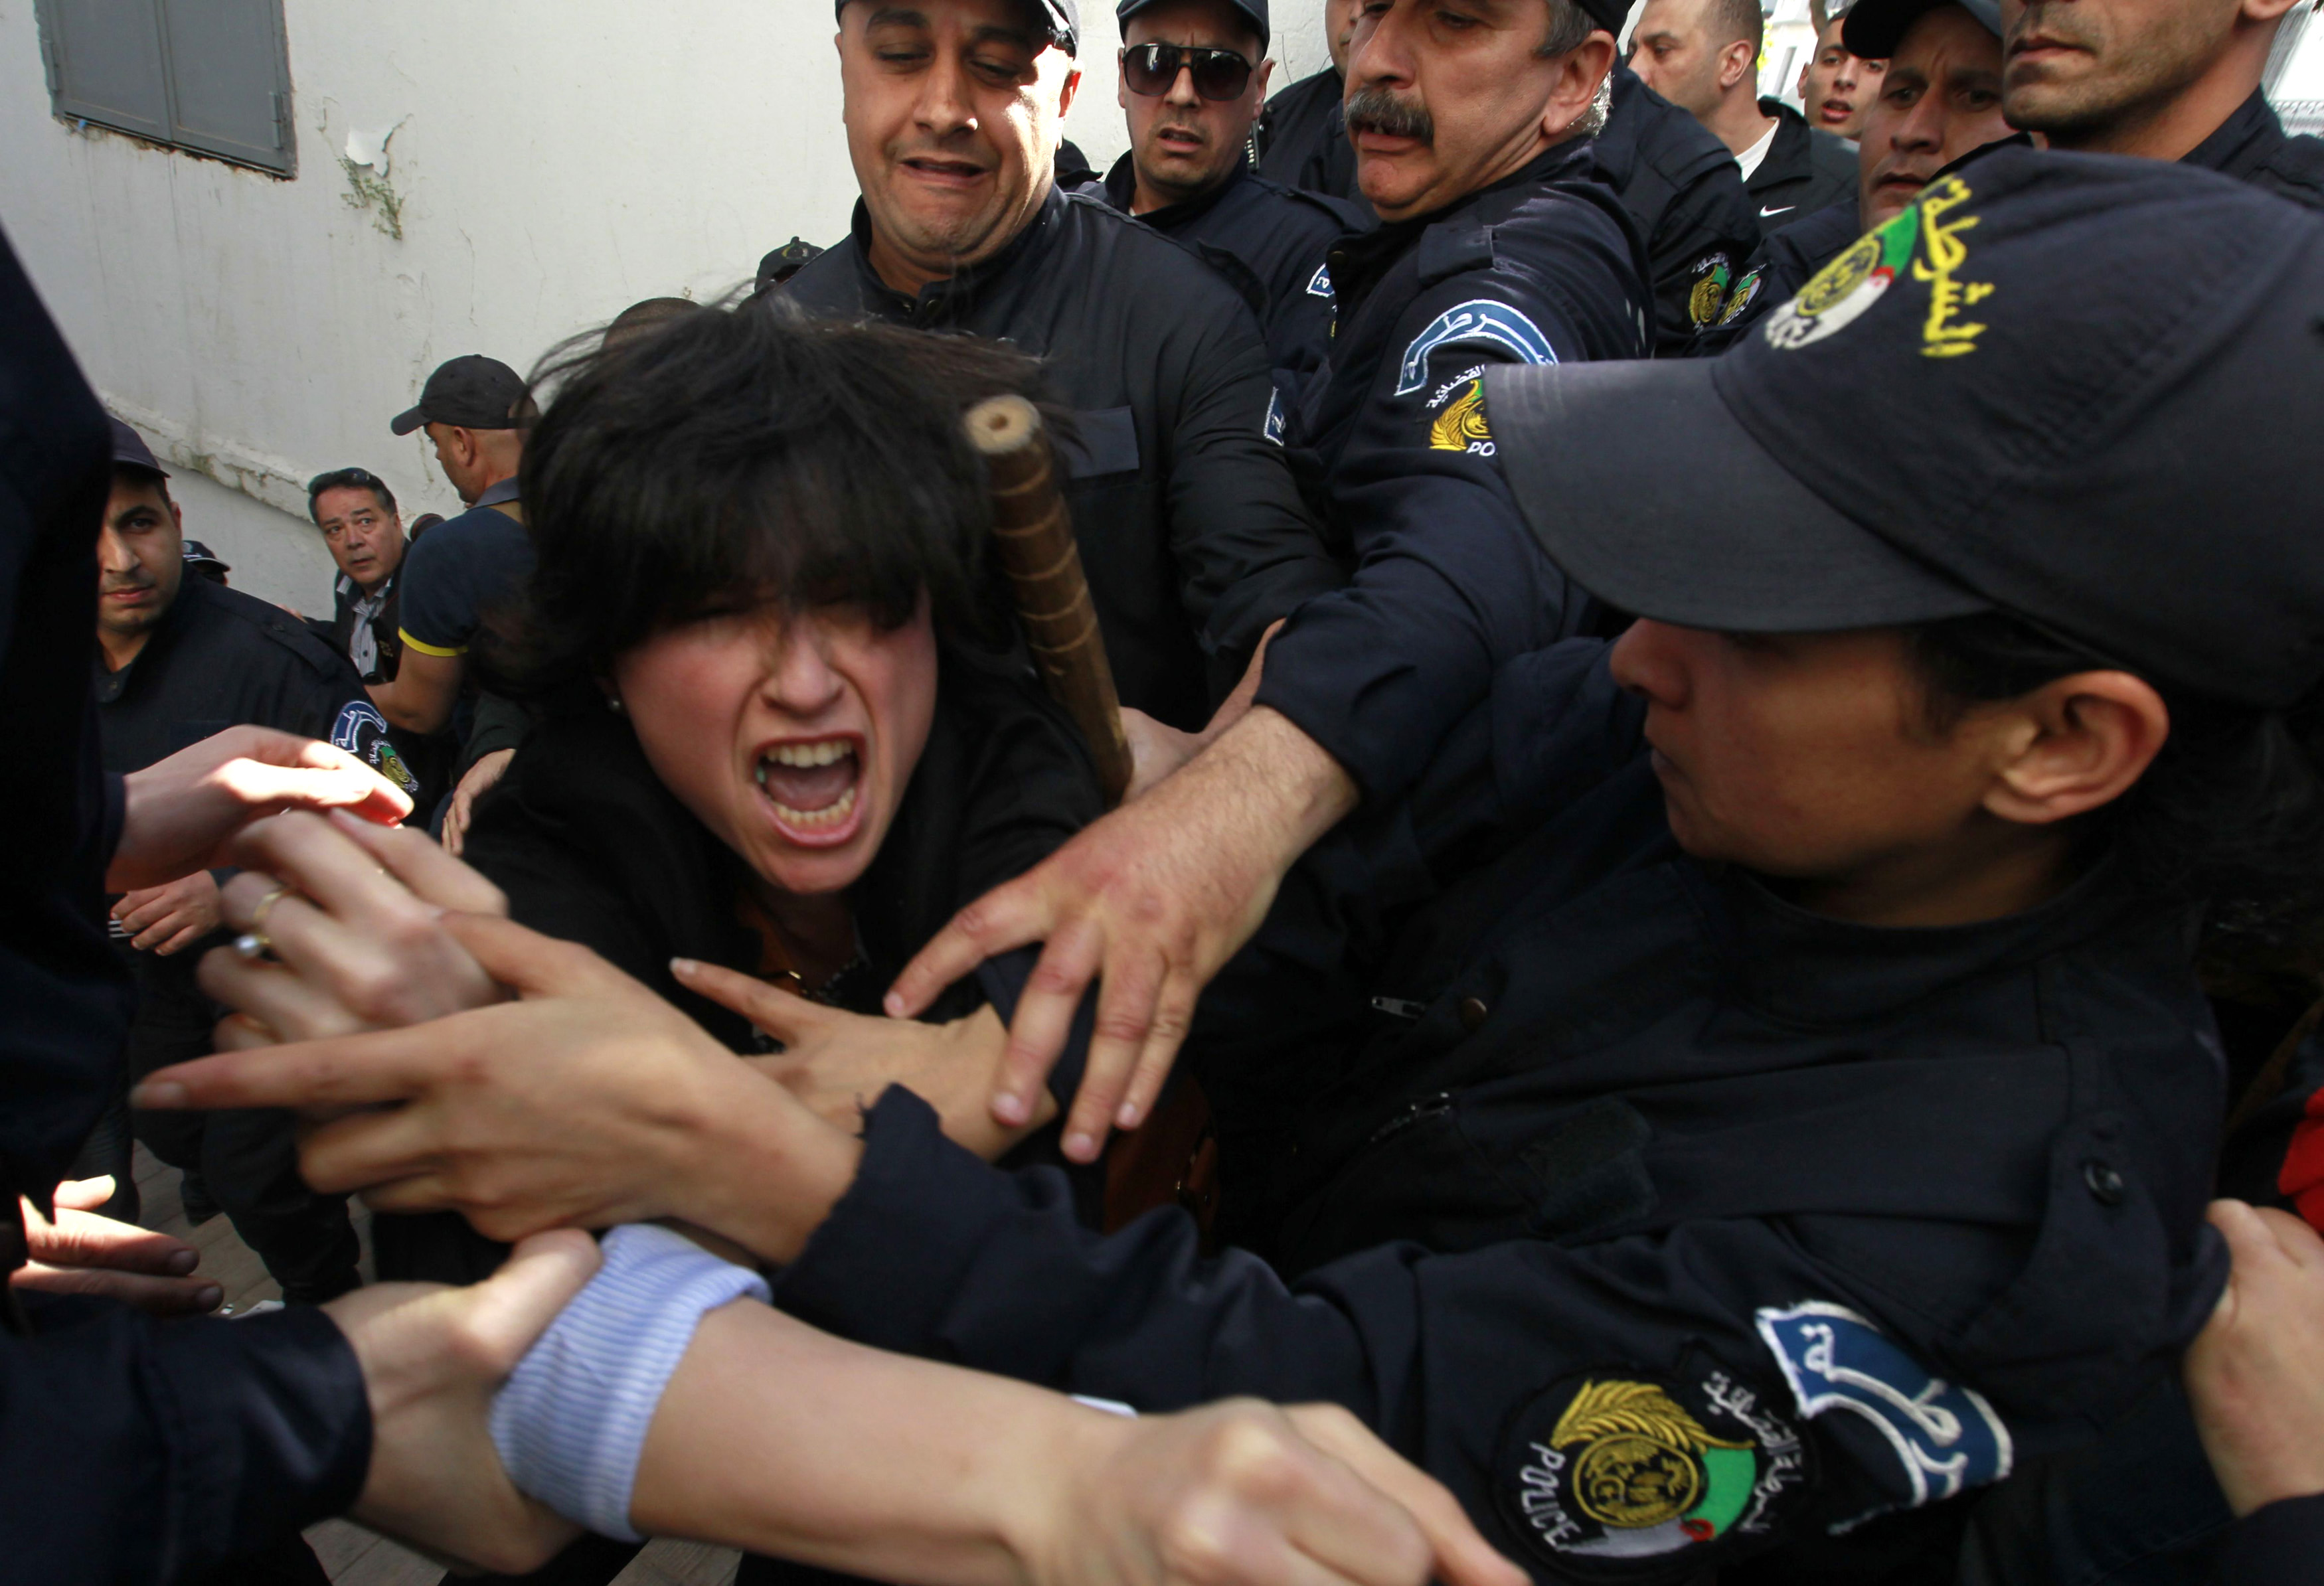 Police officers detain a protester during a demonstration against Algerian President Abdulaziz Bouteflika's decision to run for a fourth term, in Algiers 16 April 2014